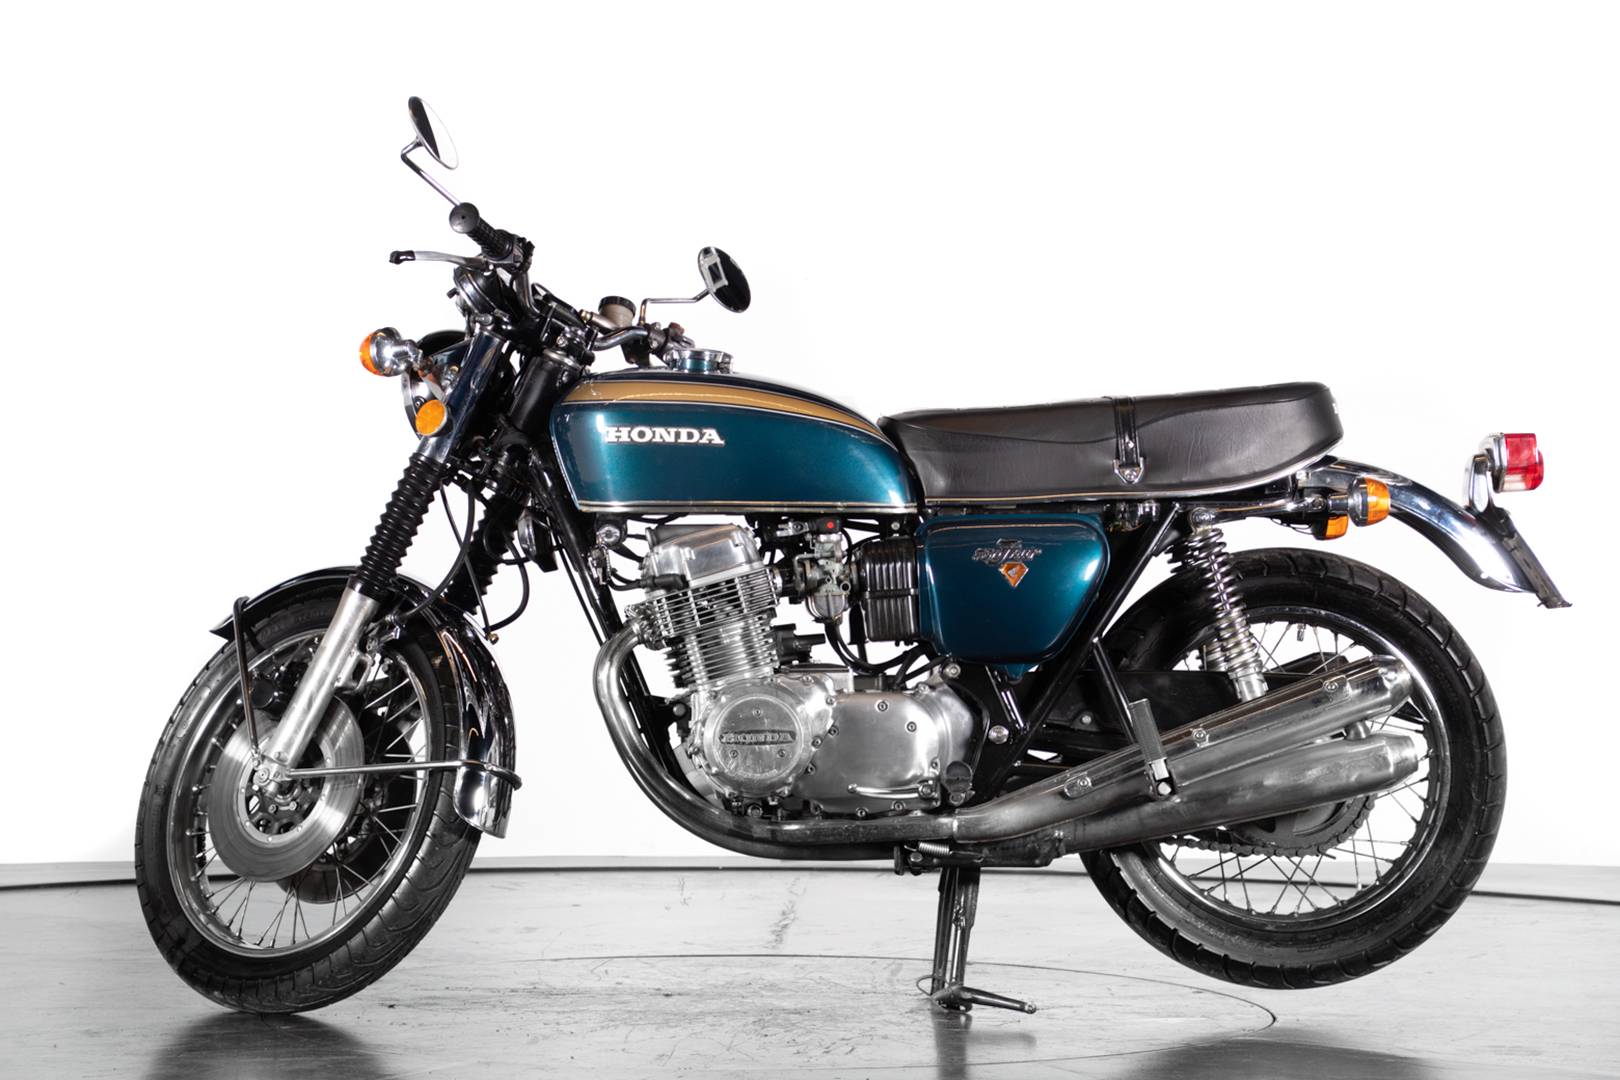 For Sale Honda CB 750 Four (1973) offered for AUD 16,755